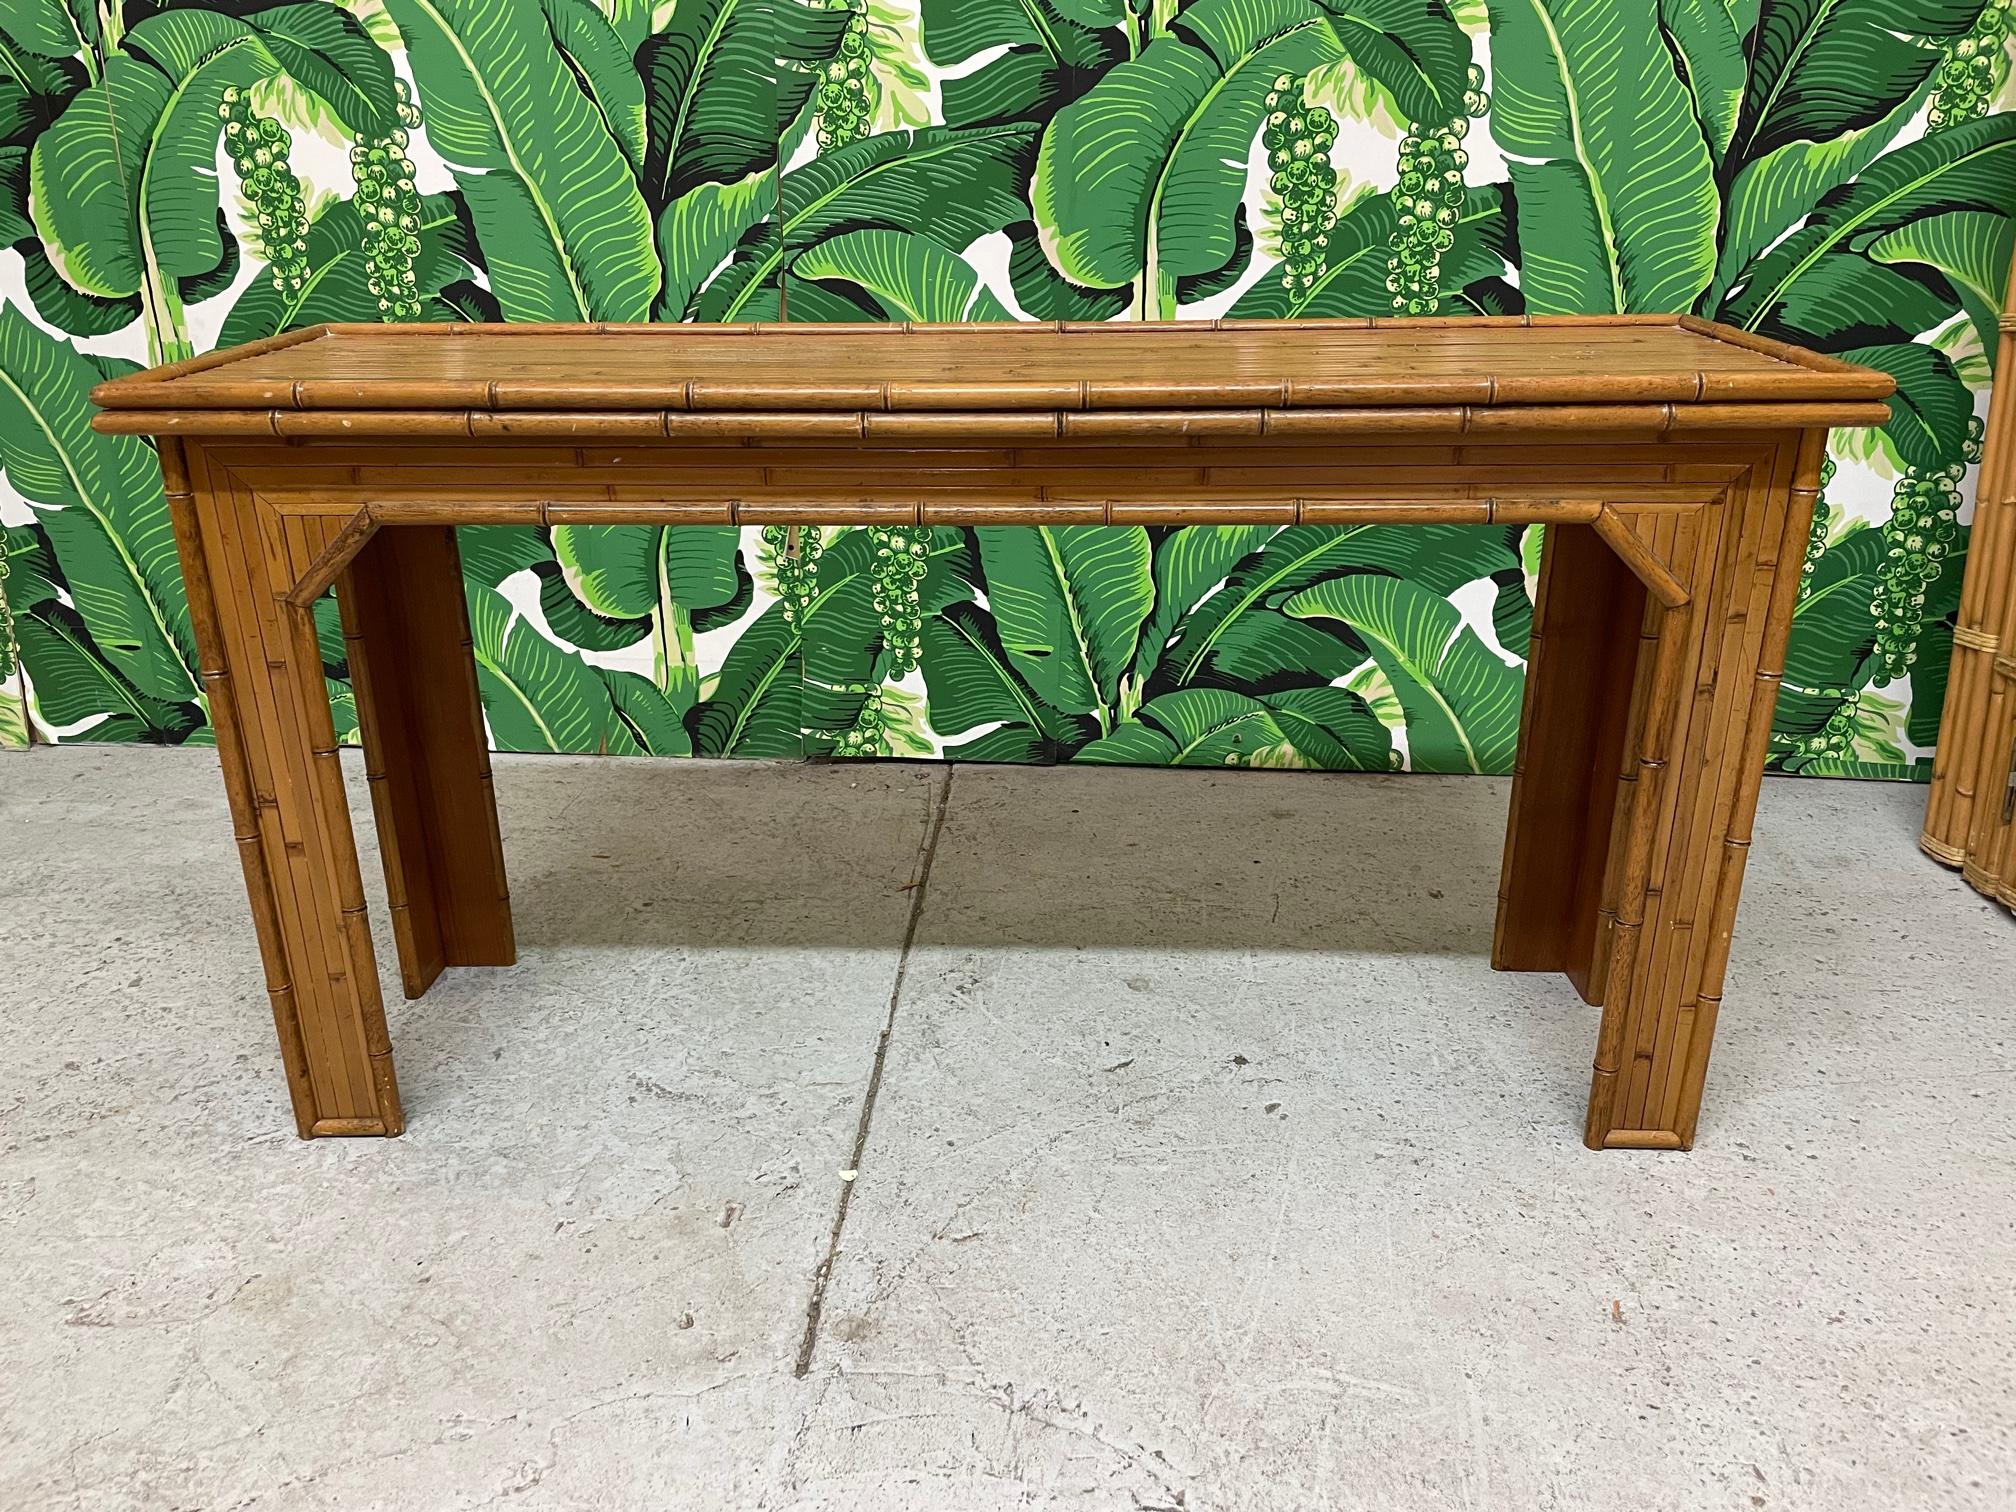 Vintage console/sofa table features a full veneer of split reed rattan and faux bamboo detailing. Very good condition with minor imperfections consistent with age.